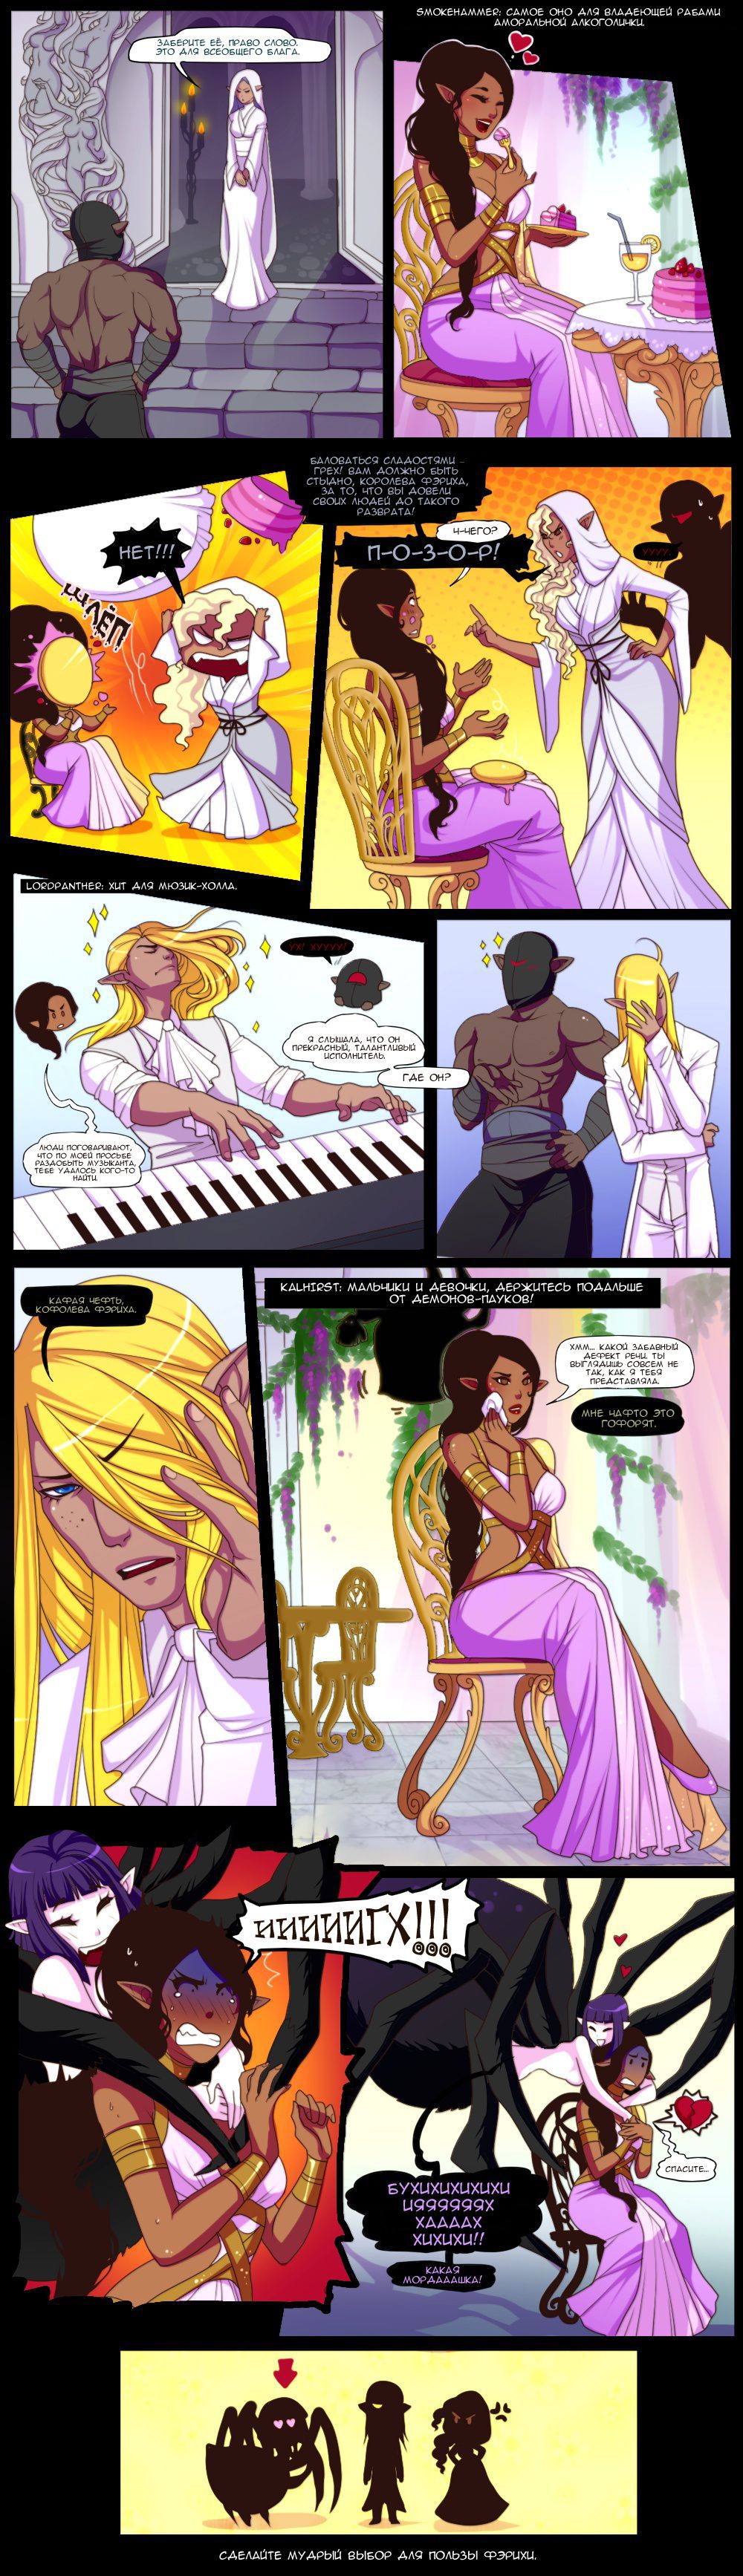 [Lunareth] Queen of Butts [Russian] (Ongoing) 25